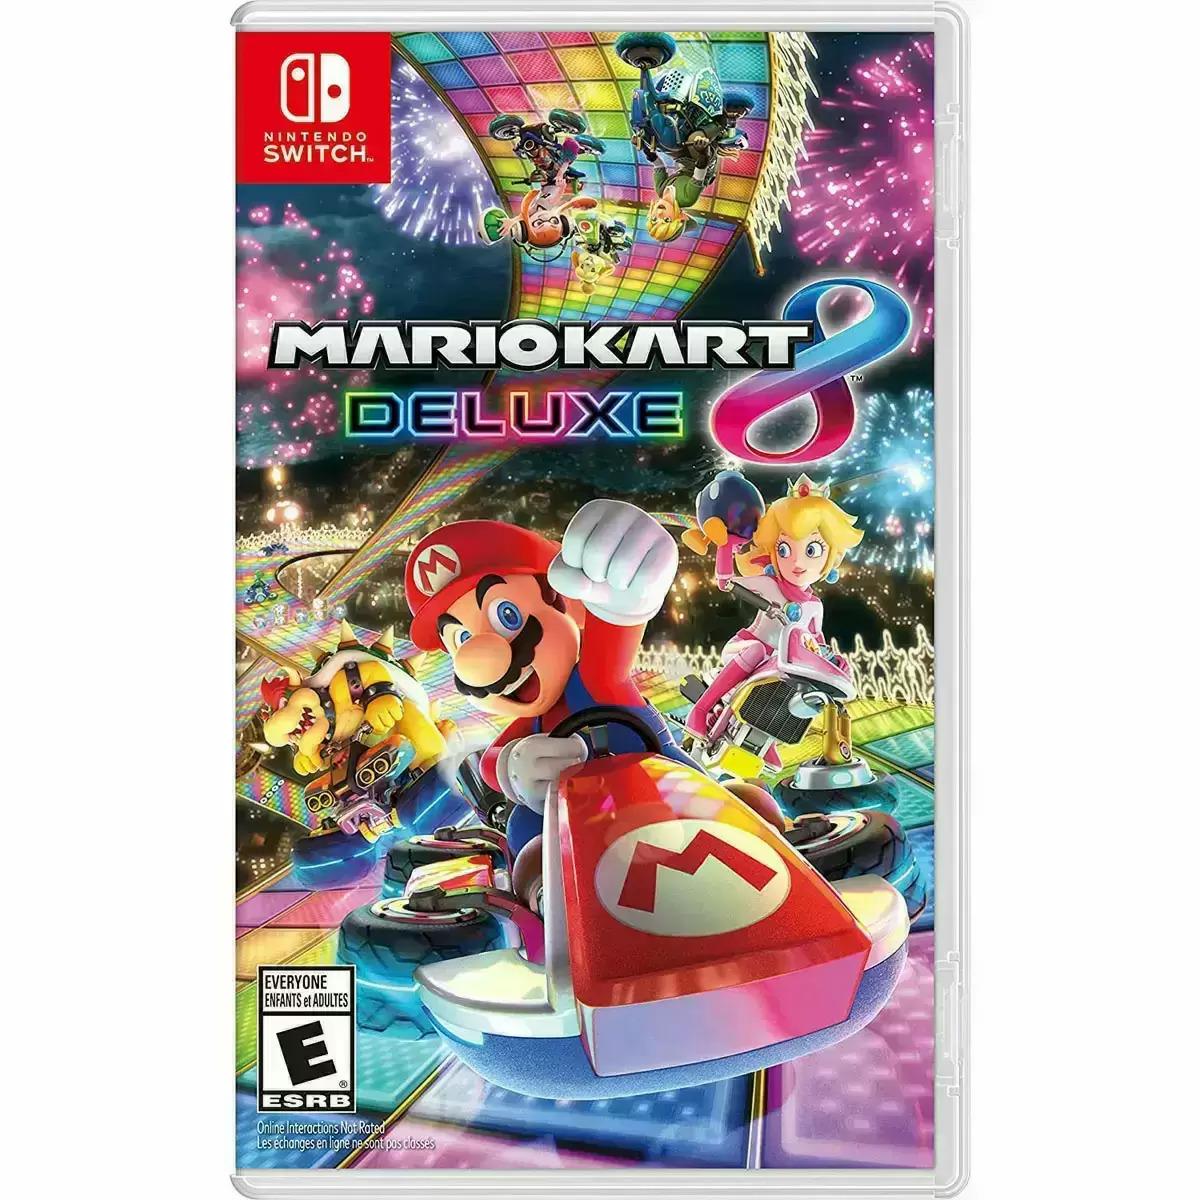 Mario Kart 8 Deluxe Nintendo Switch for $39 Shipped